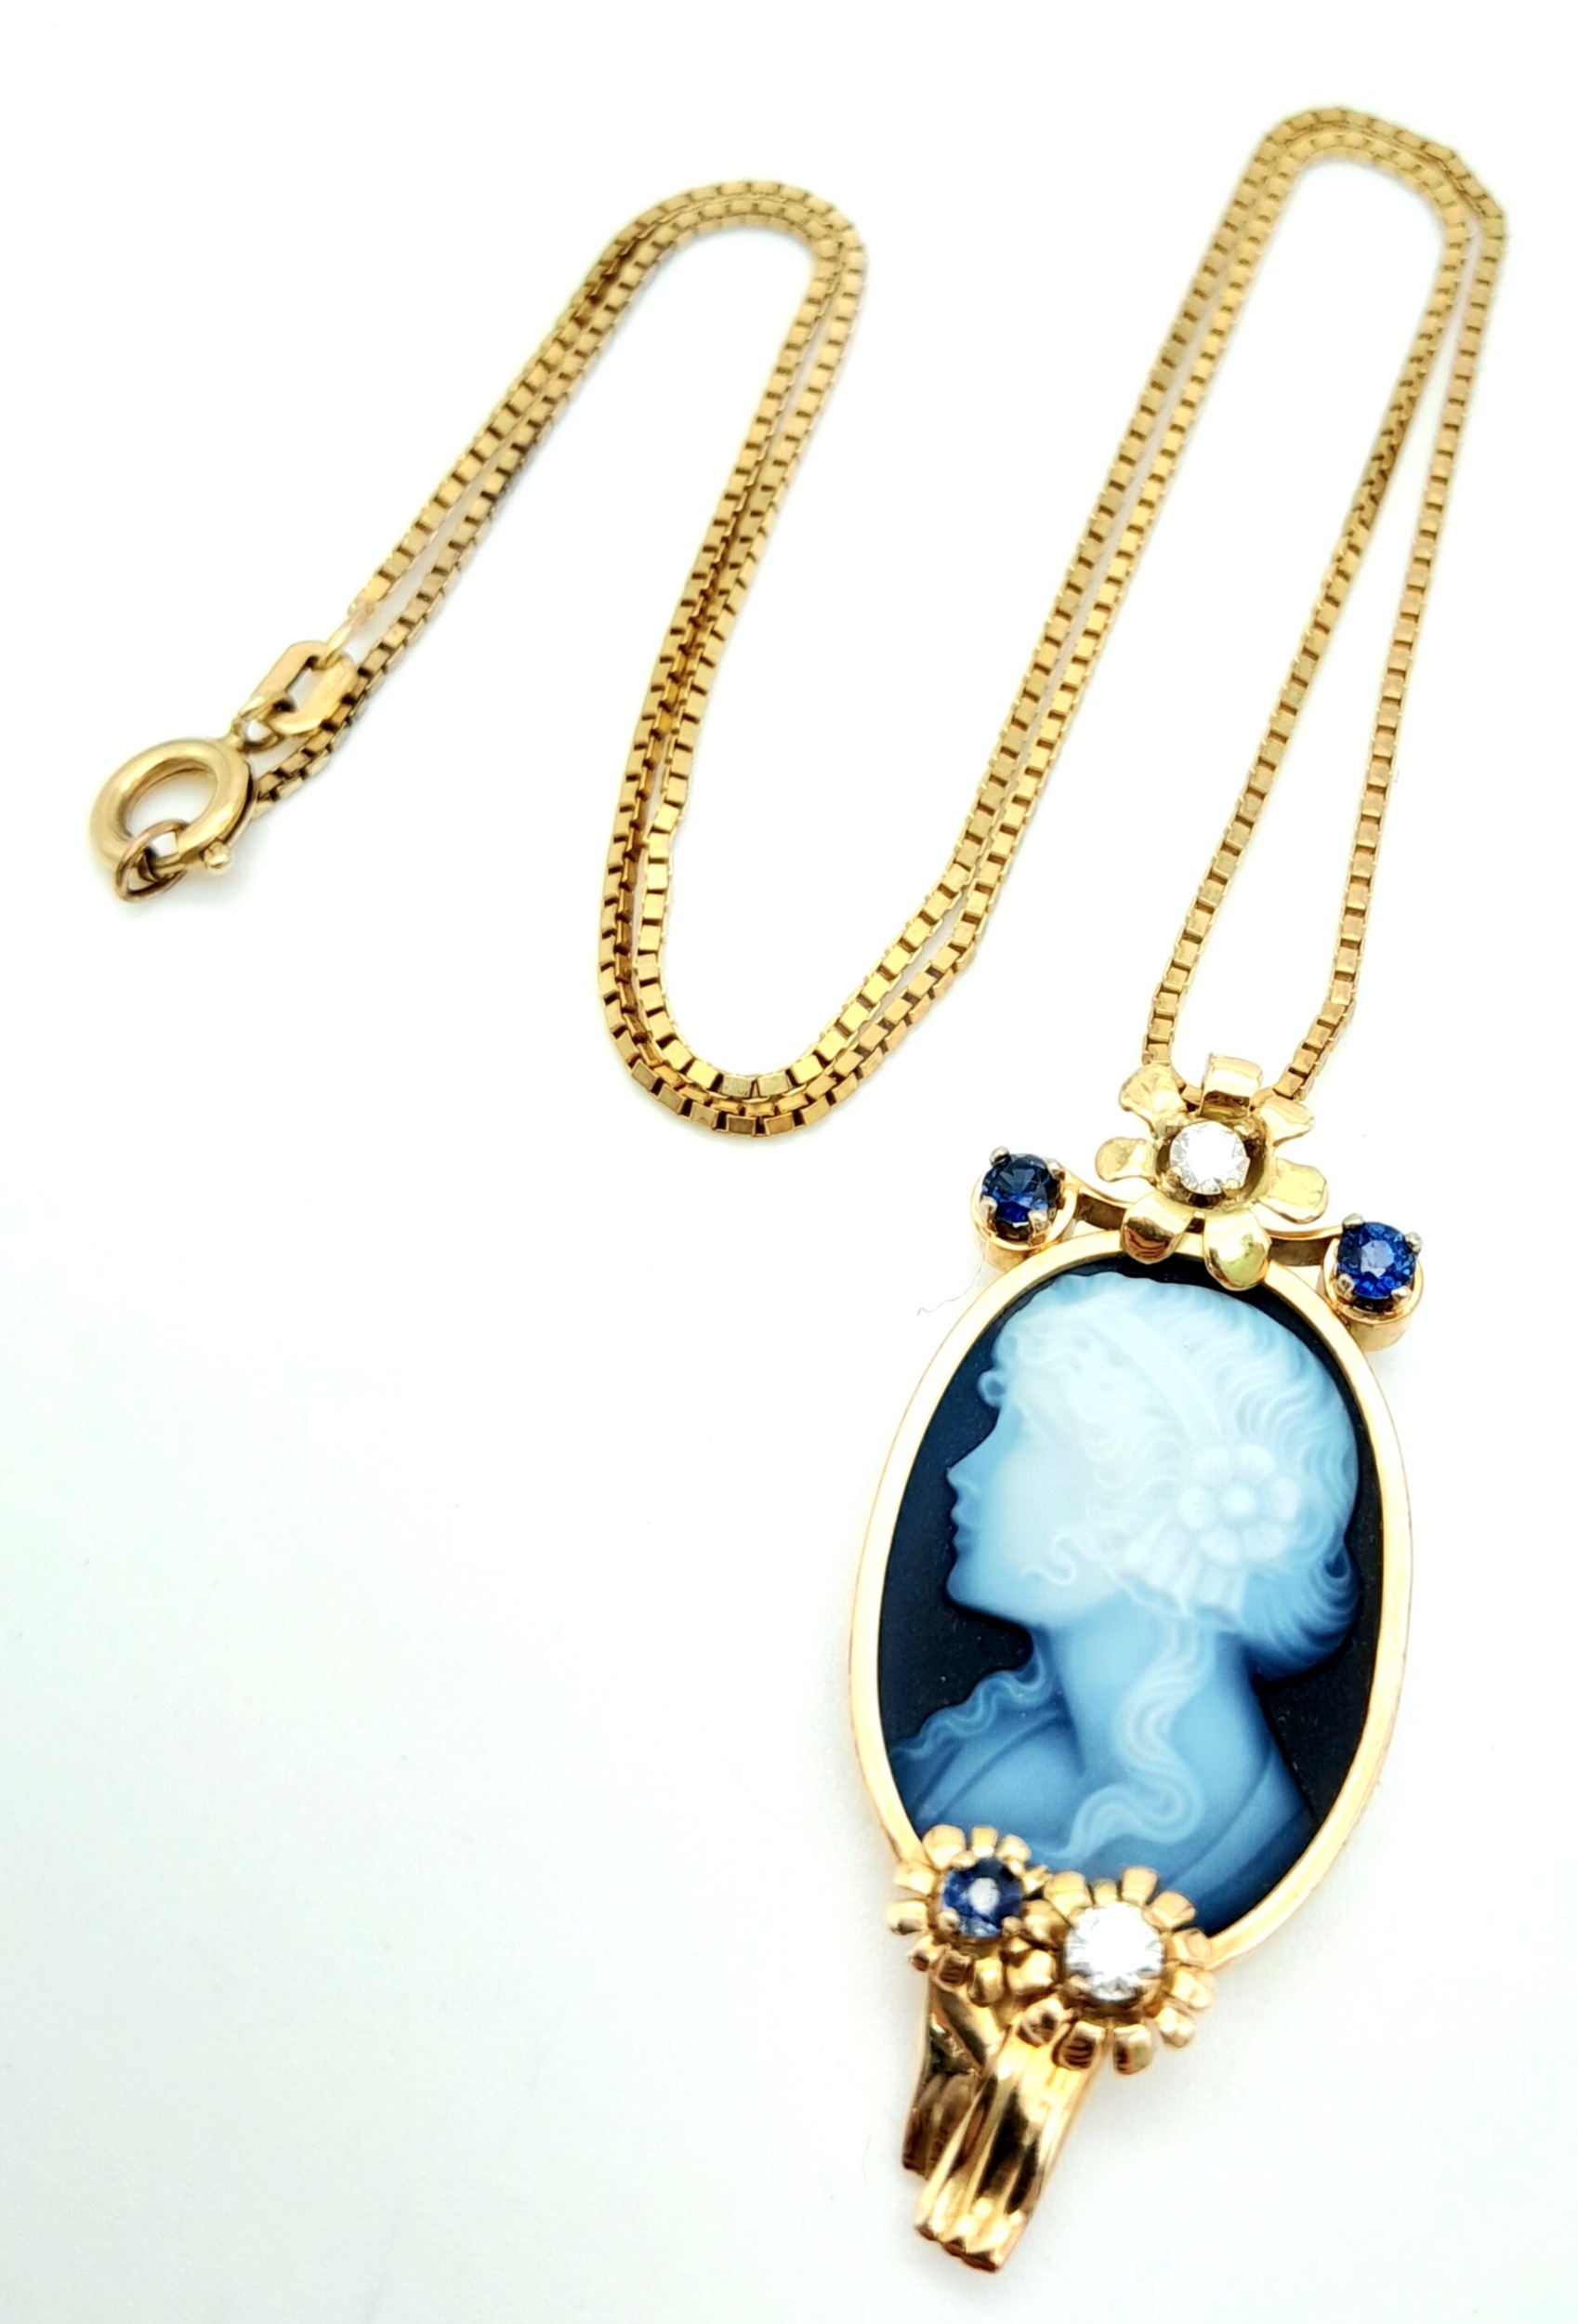 A Beautiful 9K Gold, Cameo Pendant with Sapphire and Diamond decoration on a 9K link chain. - Image 3 of 6